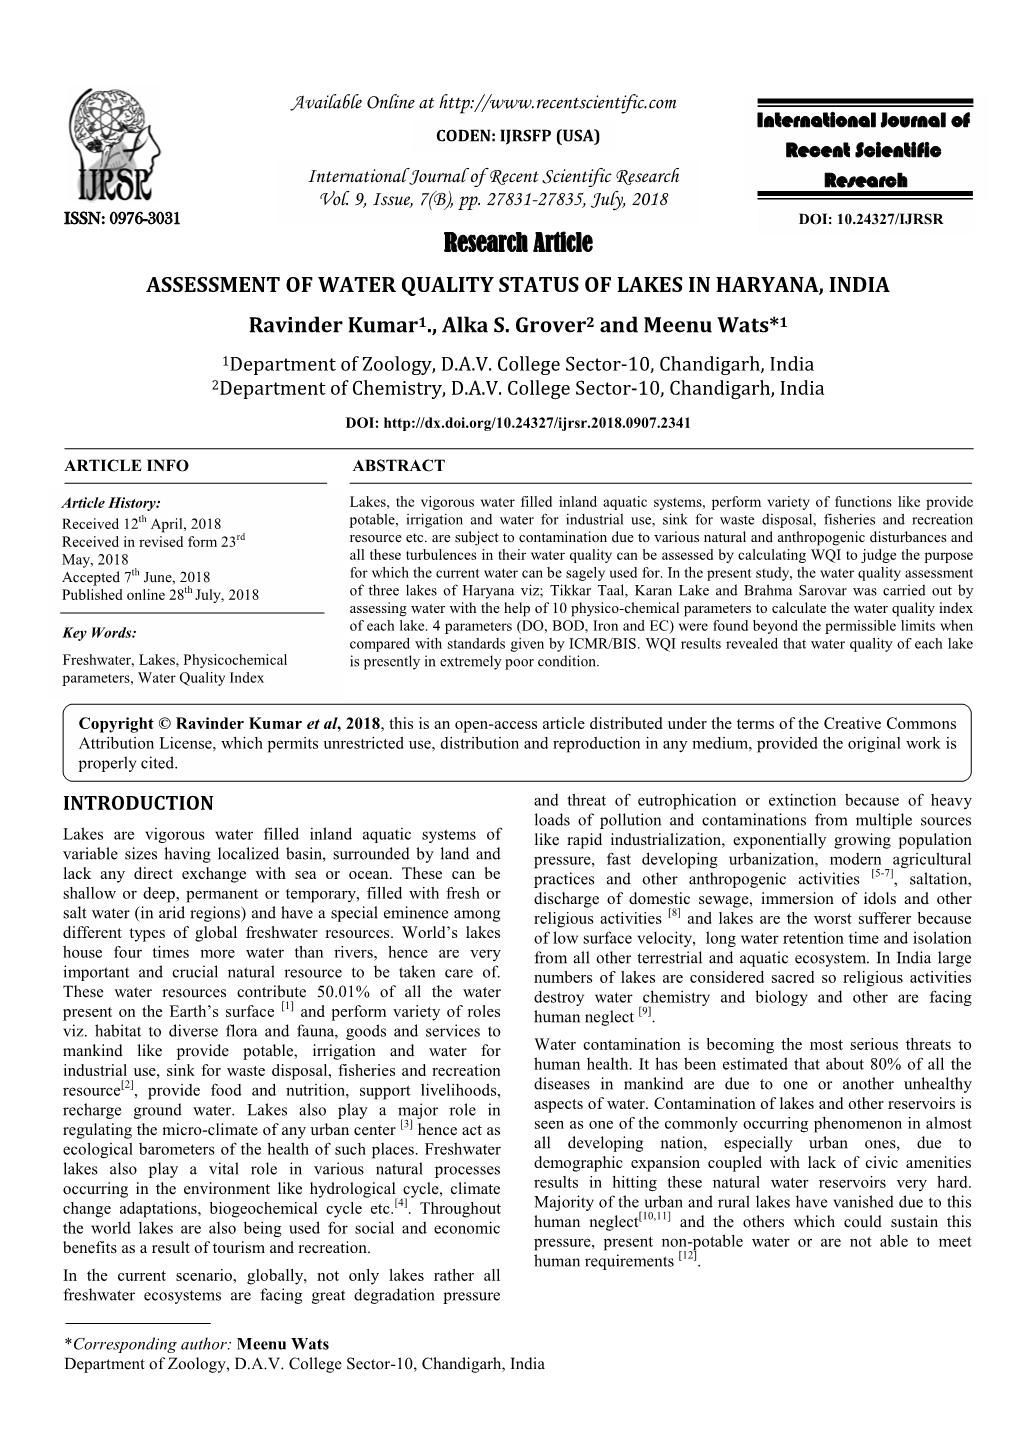 Assessment of Water Quality Status of Lakes in Haryana, India